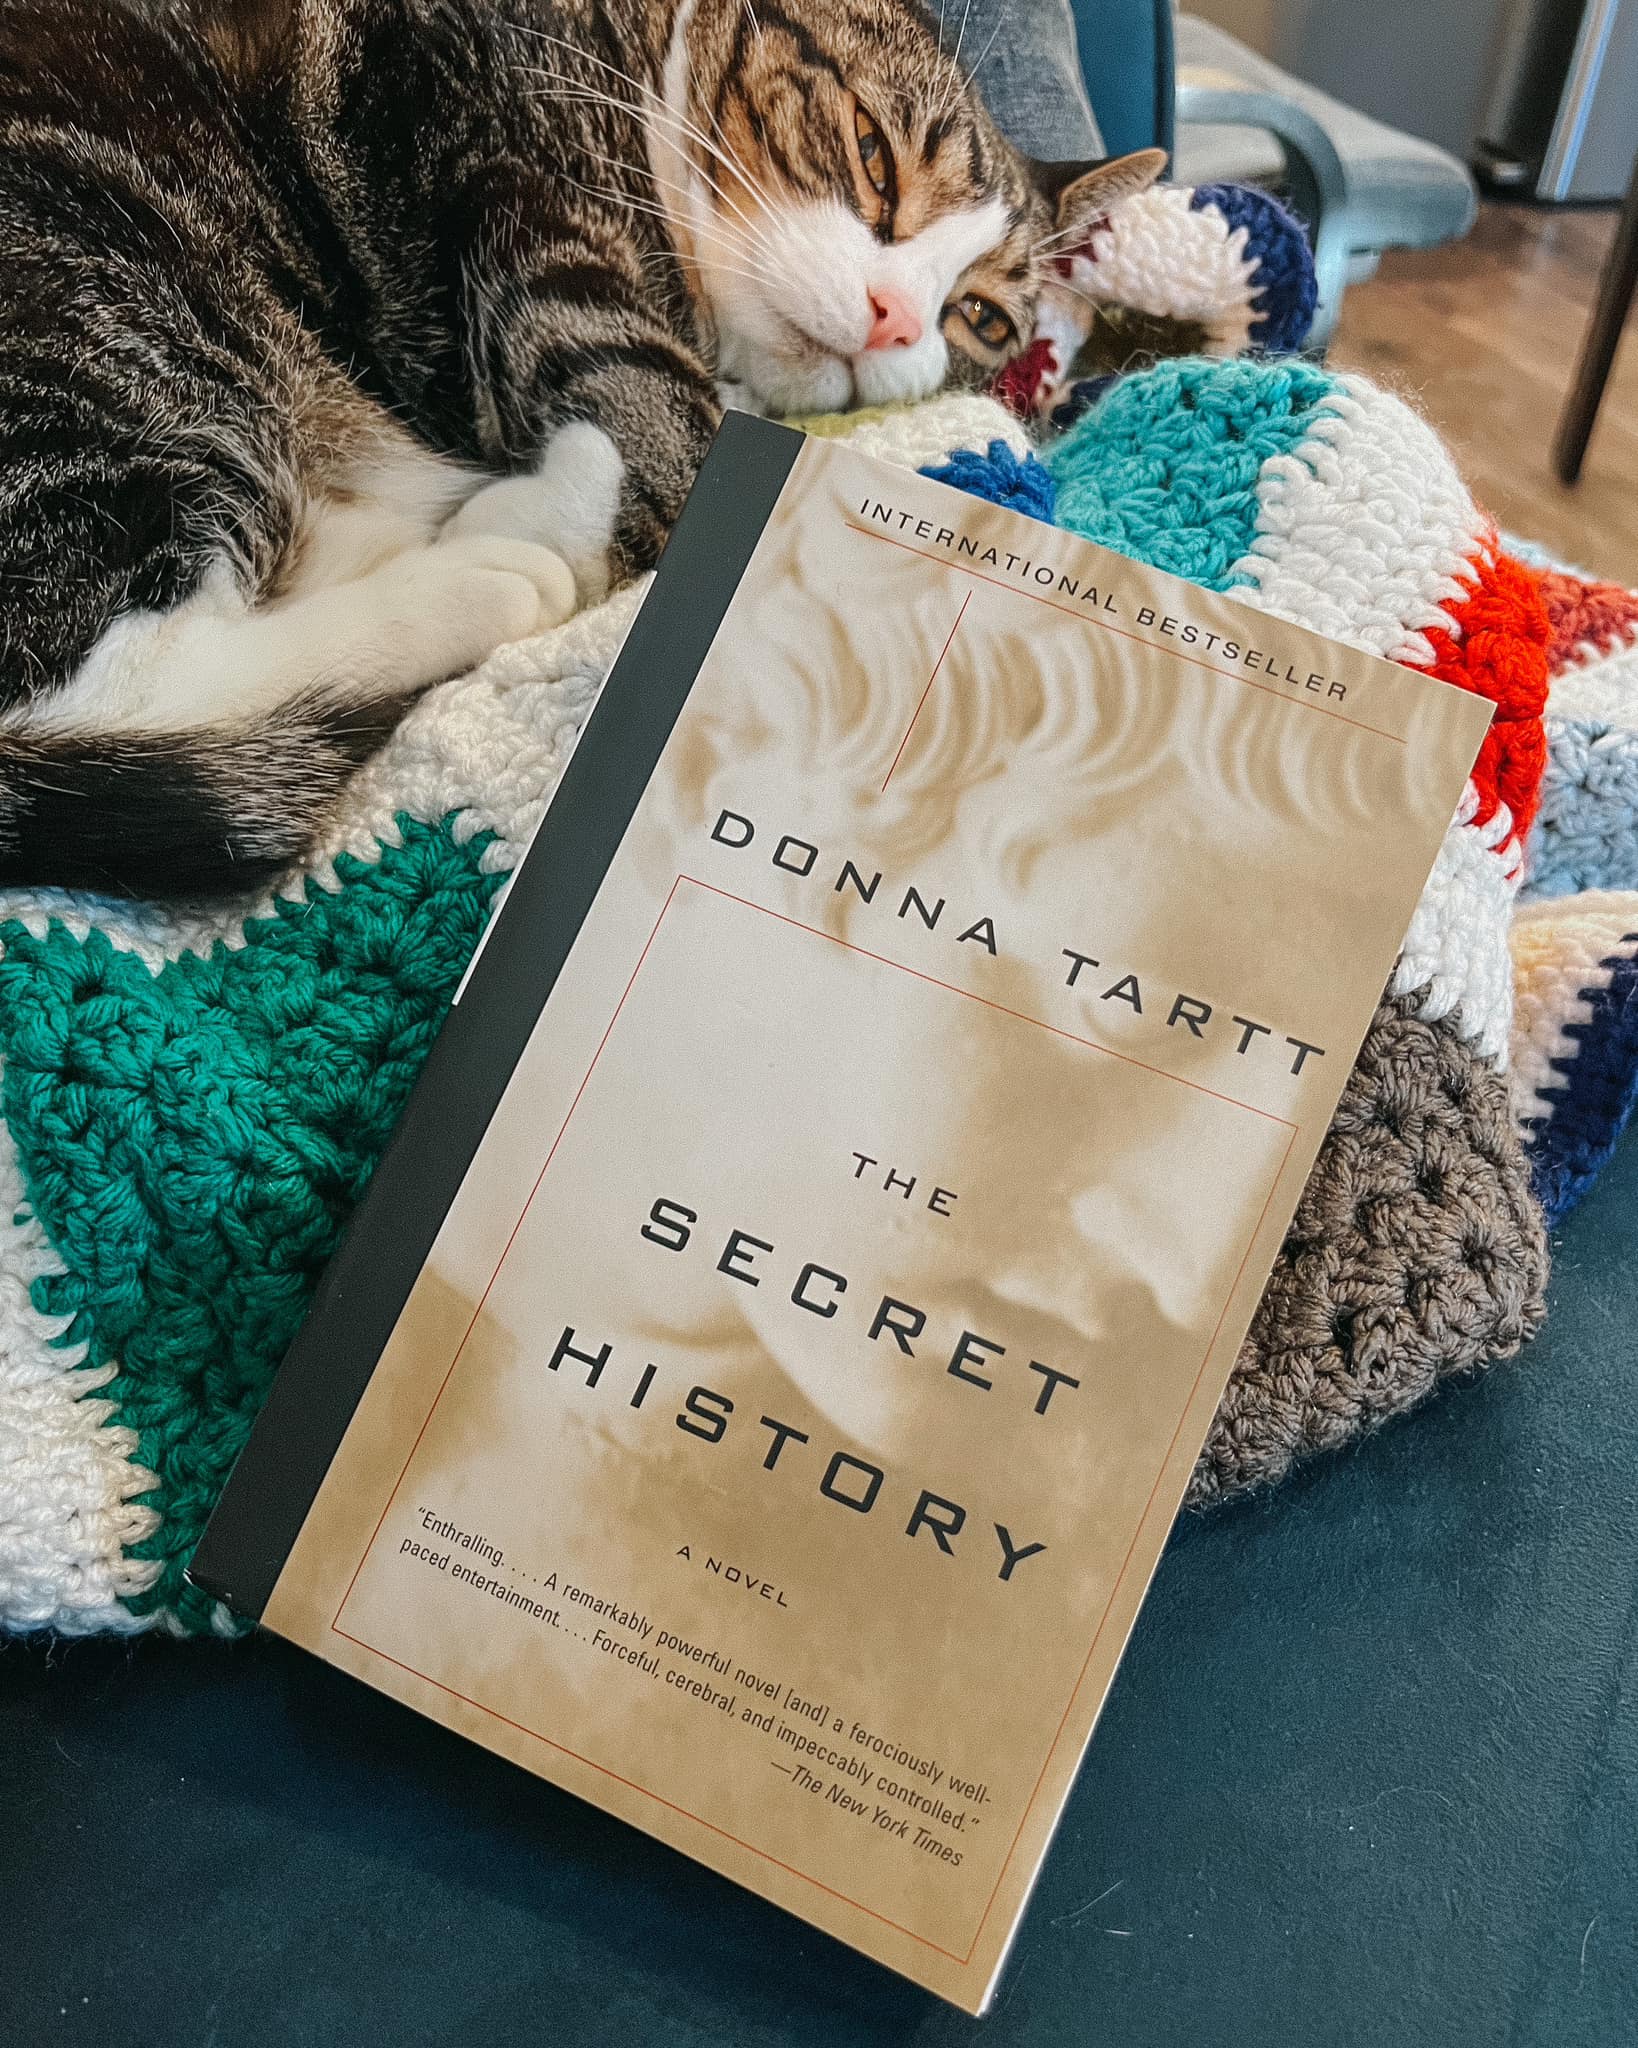 10 Fascinating Facts About Donna Tartt's 'The Secret History